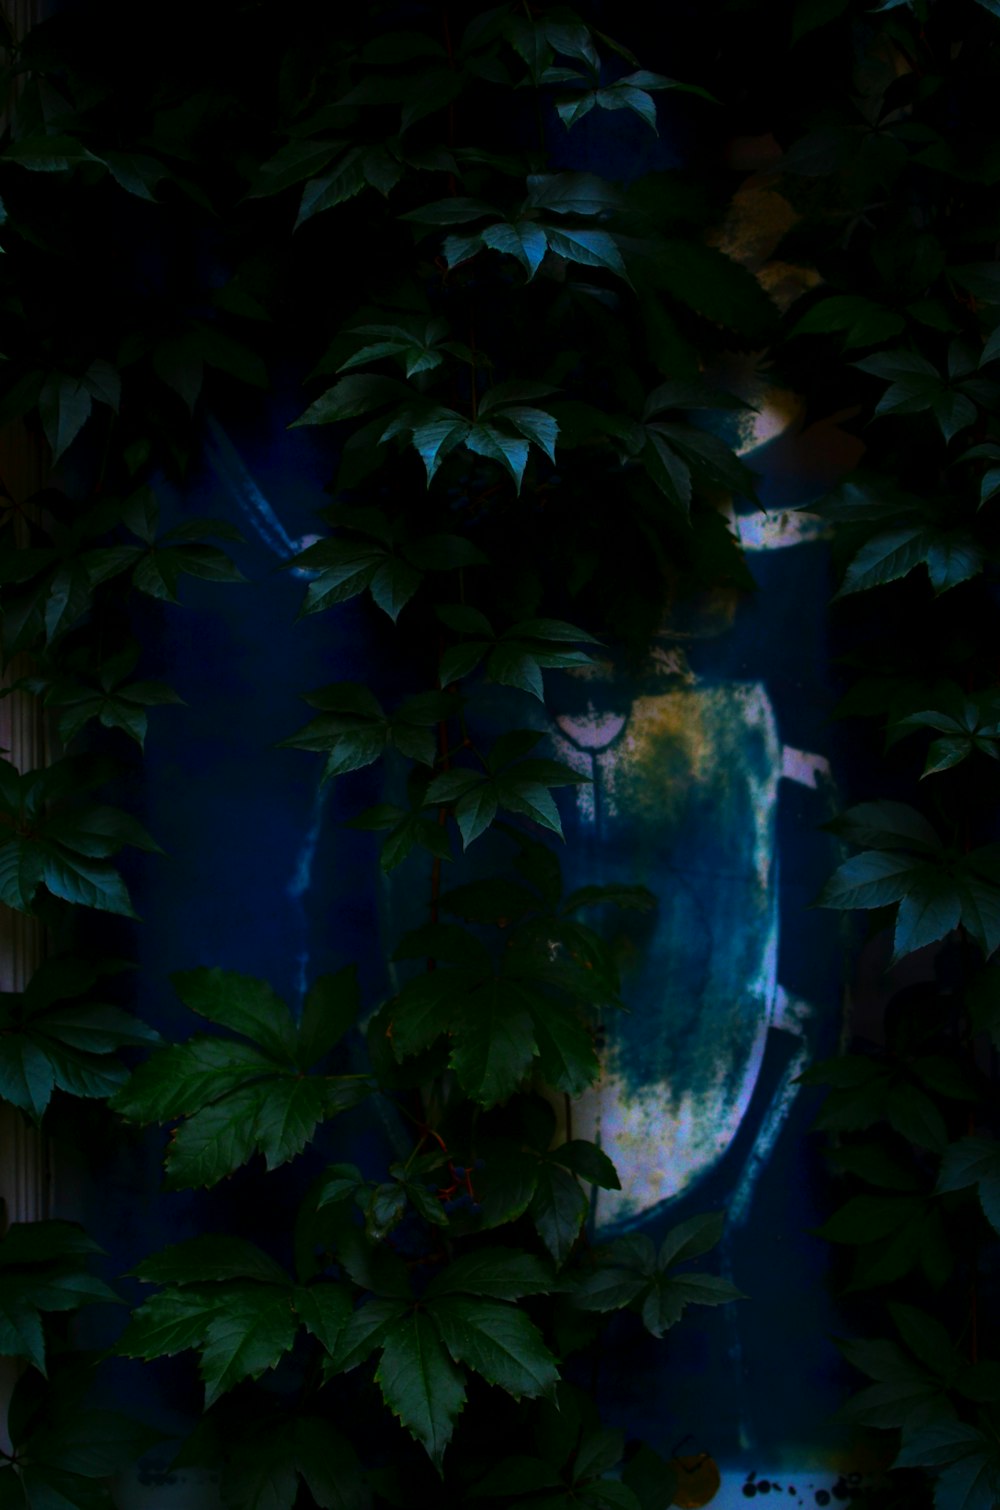 a person's face in a plant